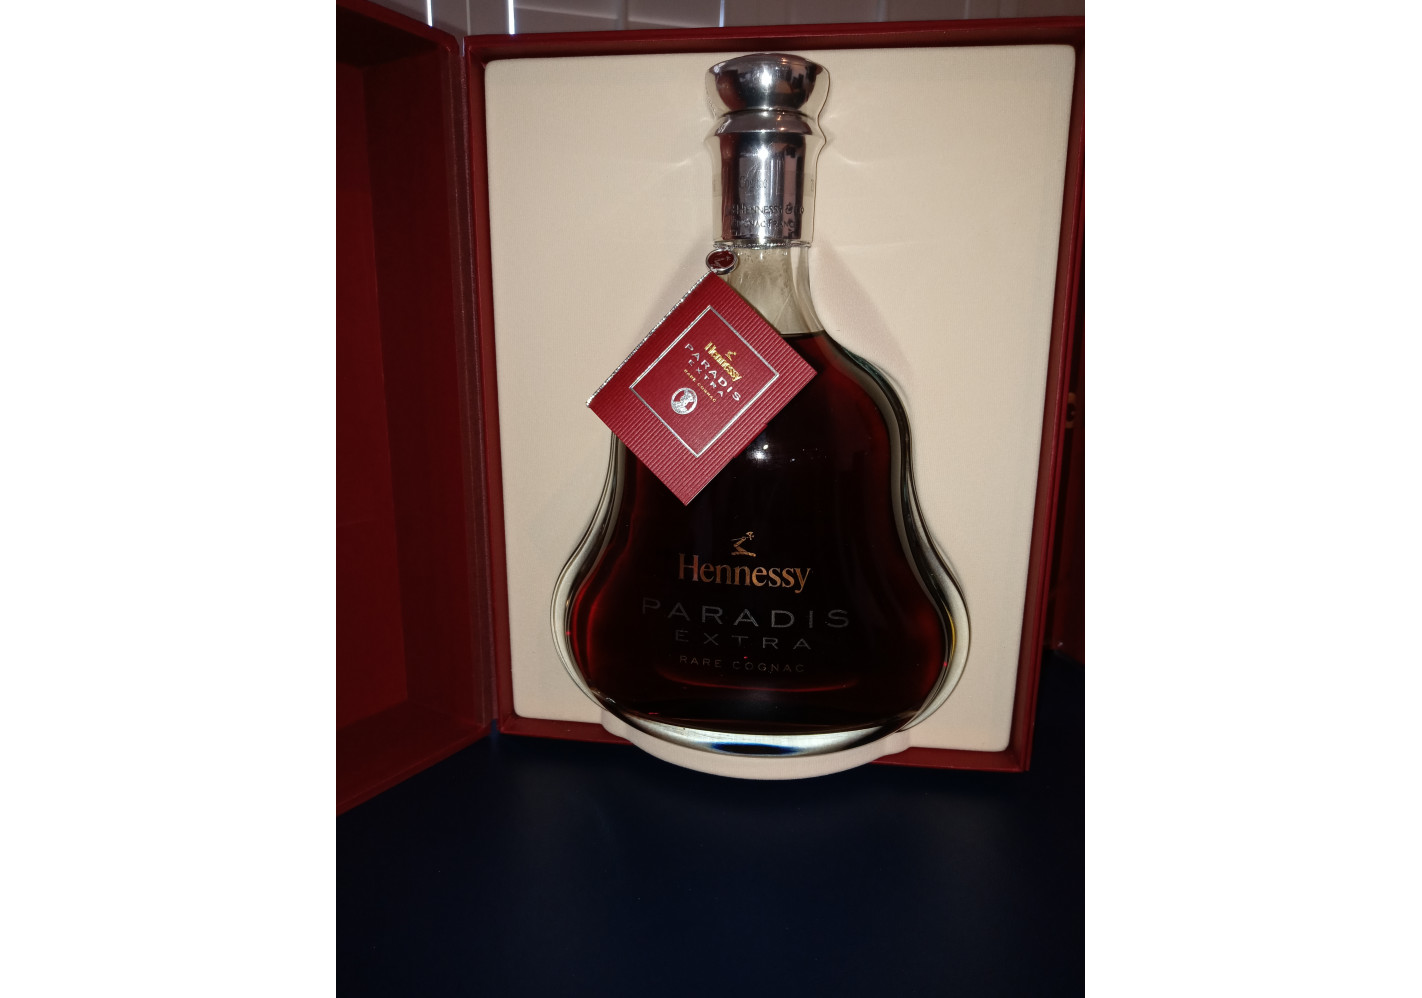 Hennesey Paradis Extra - Hennessy Cognac